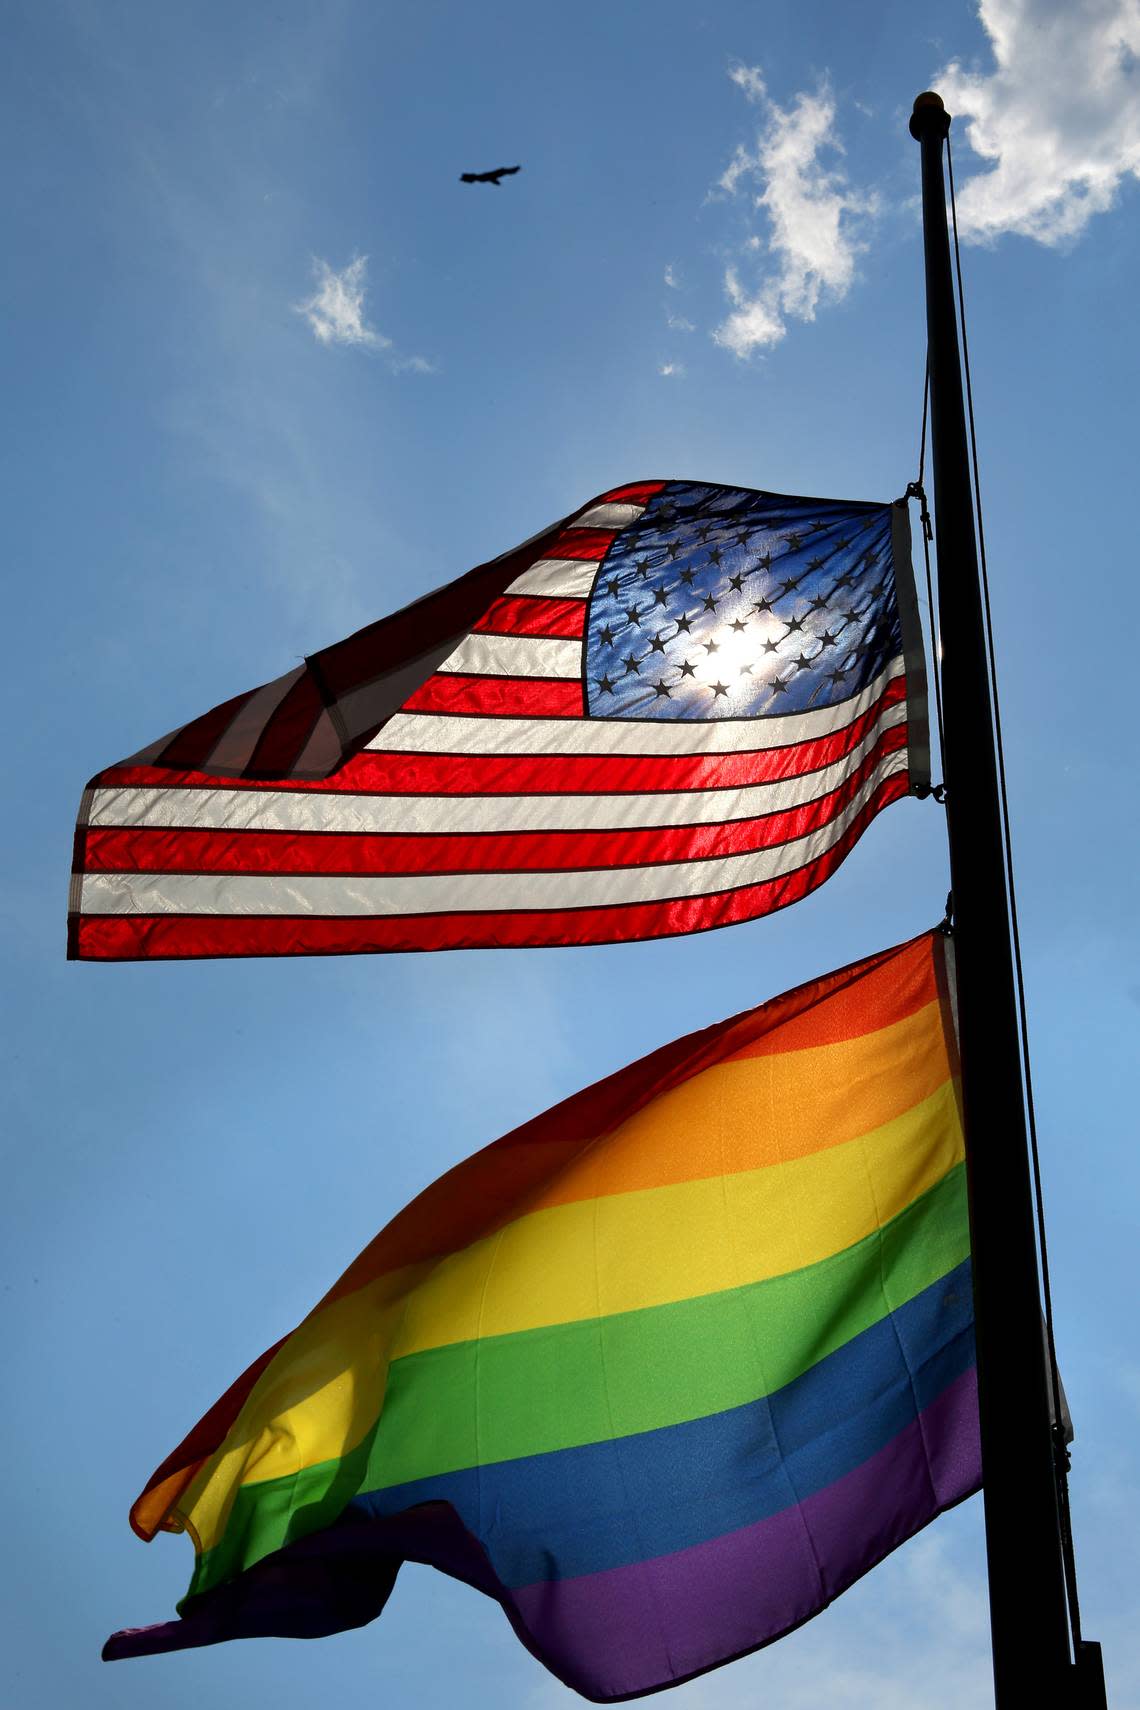 Two Tri-Cities school boards are considering banning controversial flags, including gay pride flags, from classrooms.